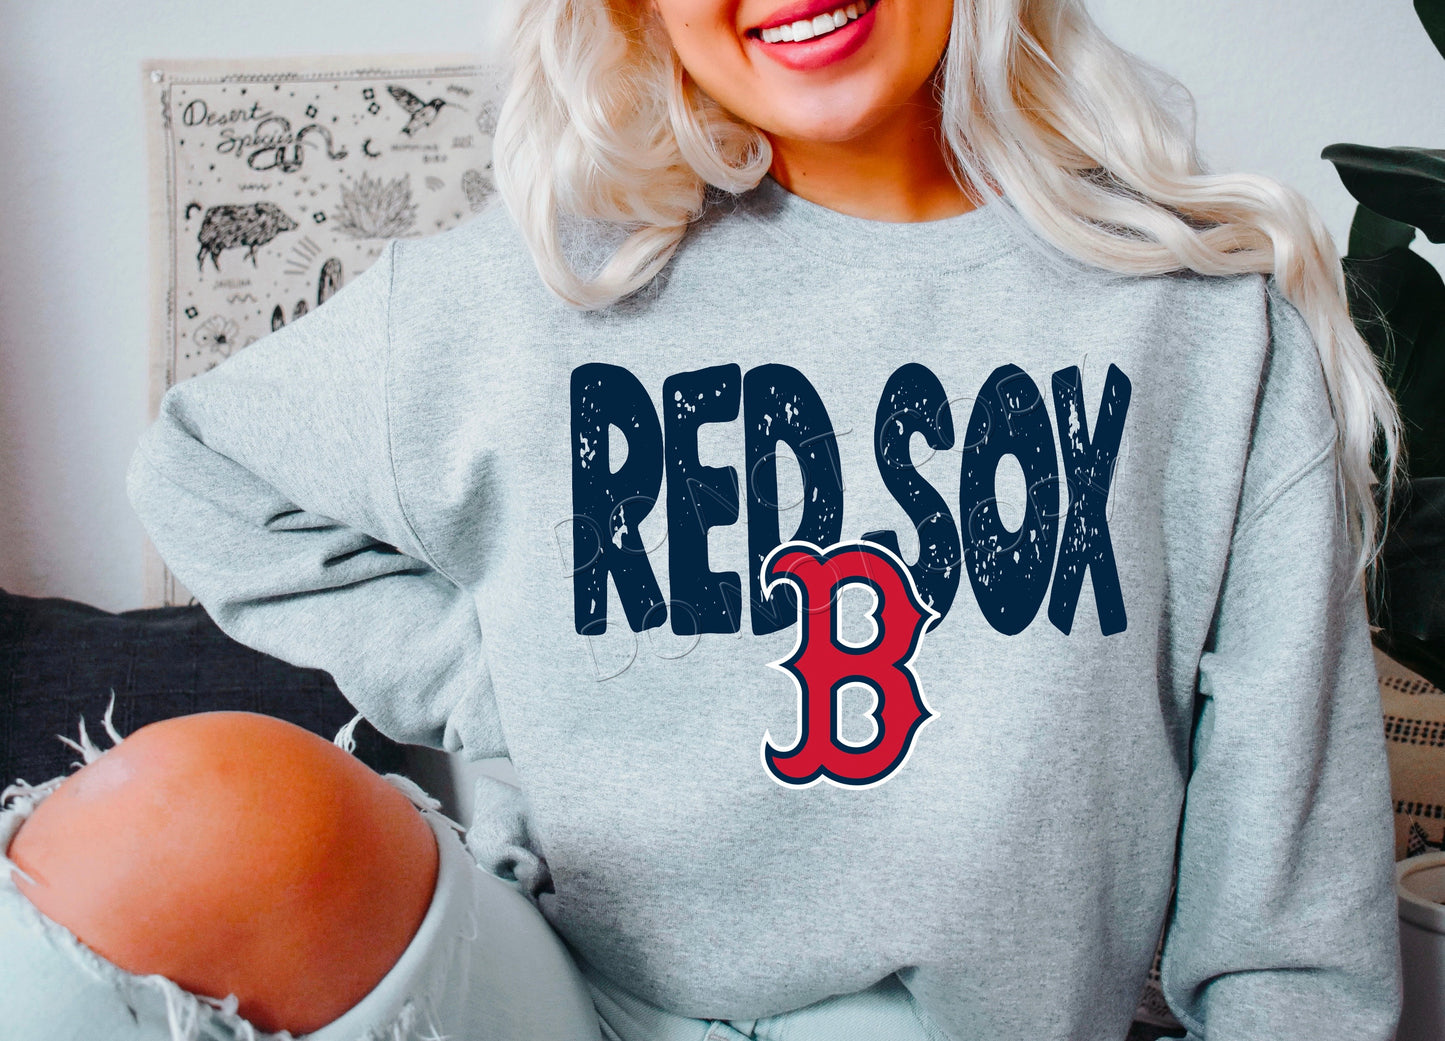 EXCLUSIVE Red Sox: *DTF*Transfer